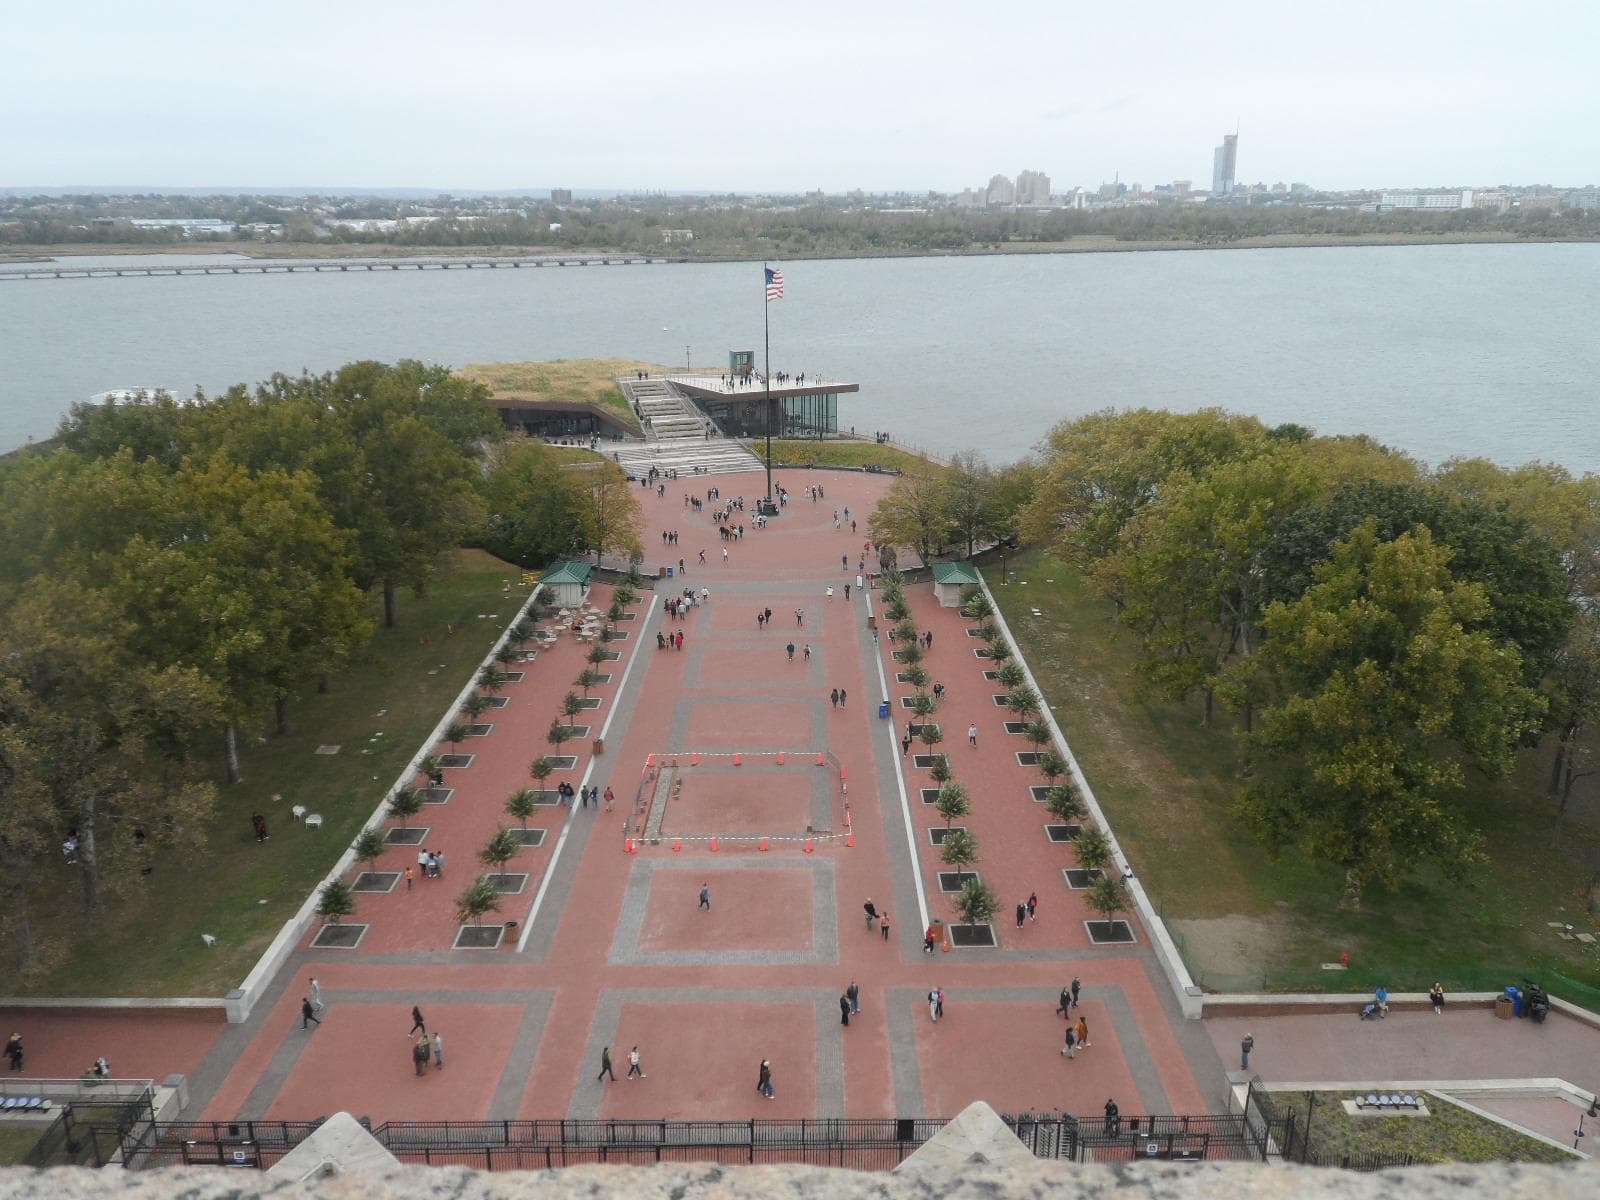 The view of the Statue of Liberty Museum from the pedestal; photo credit: Katherine Michel